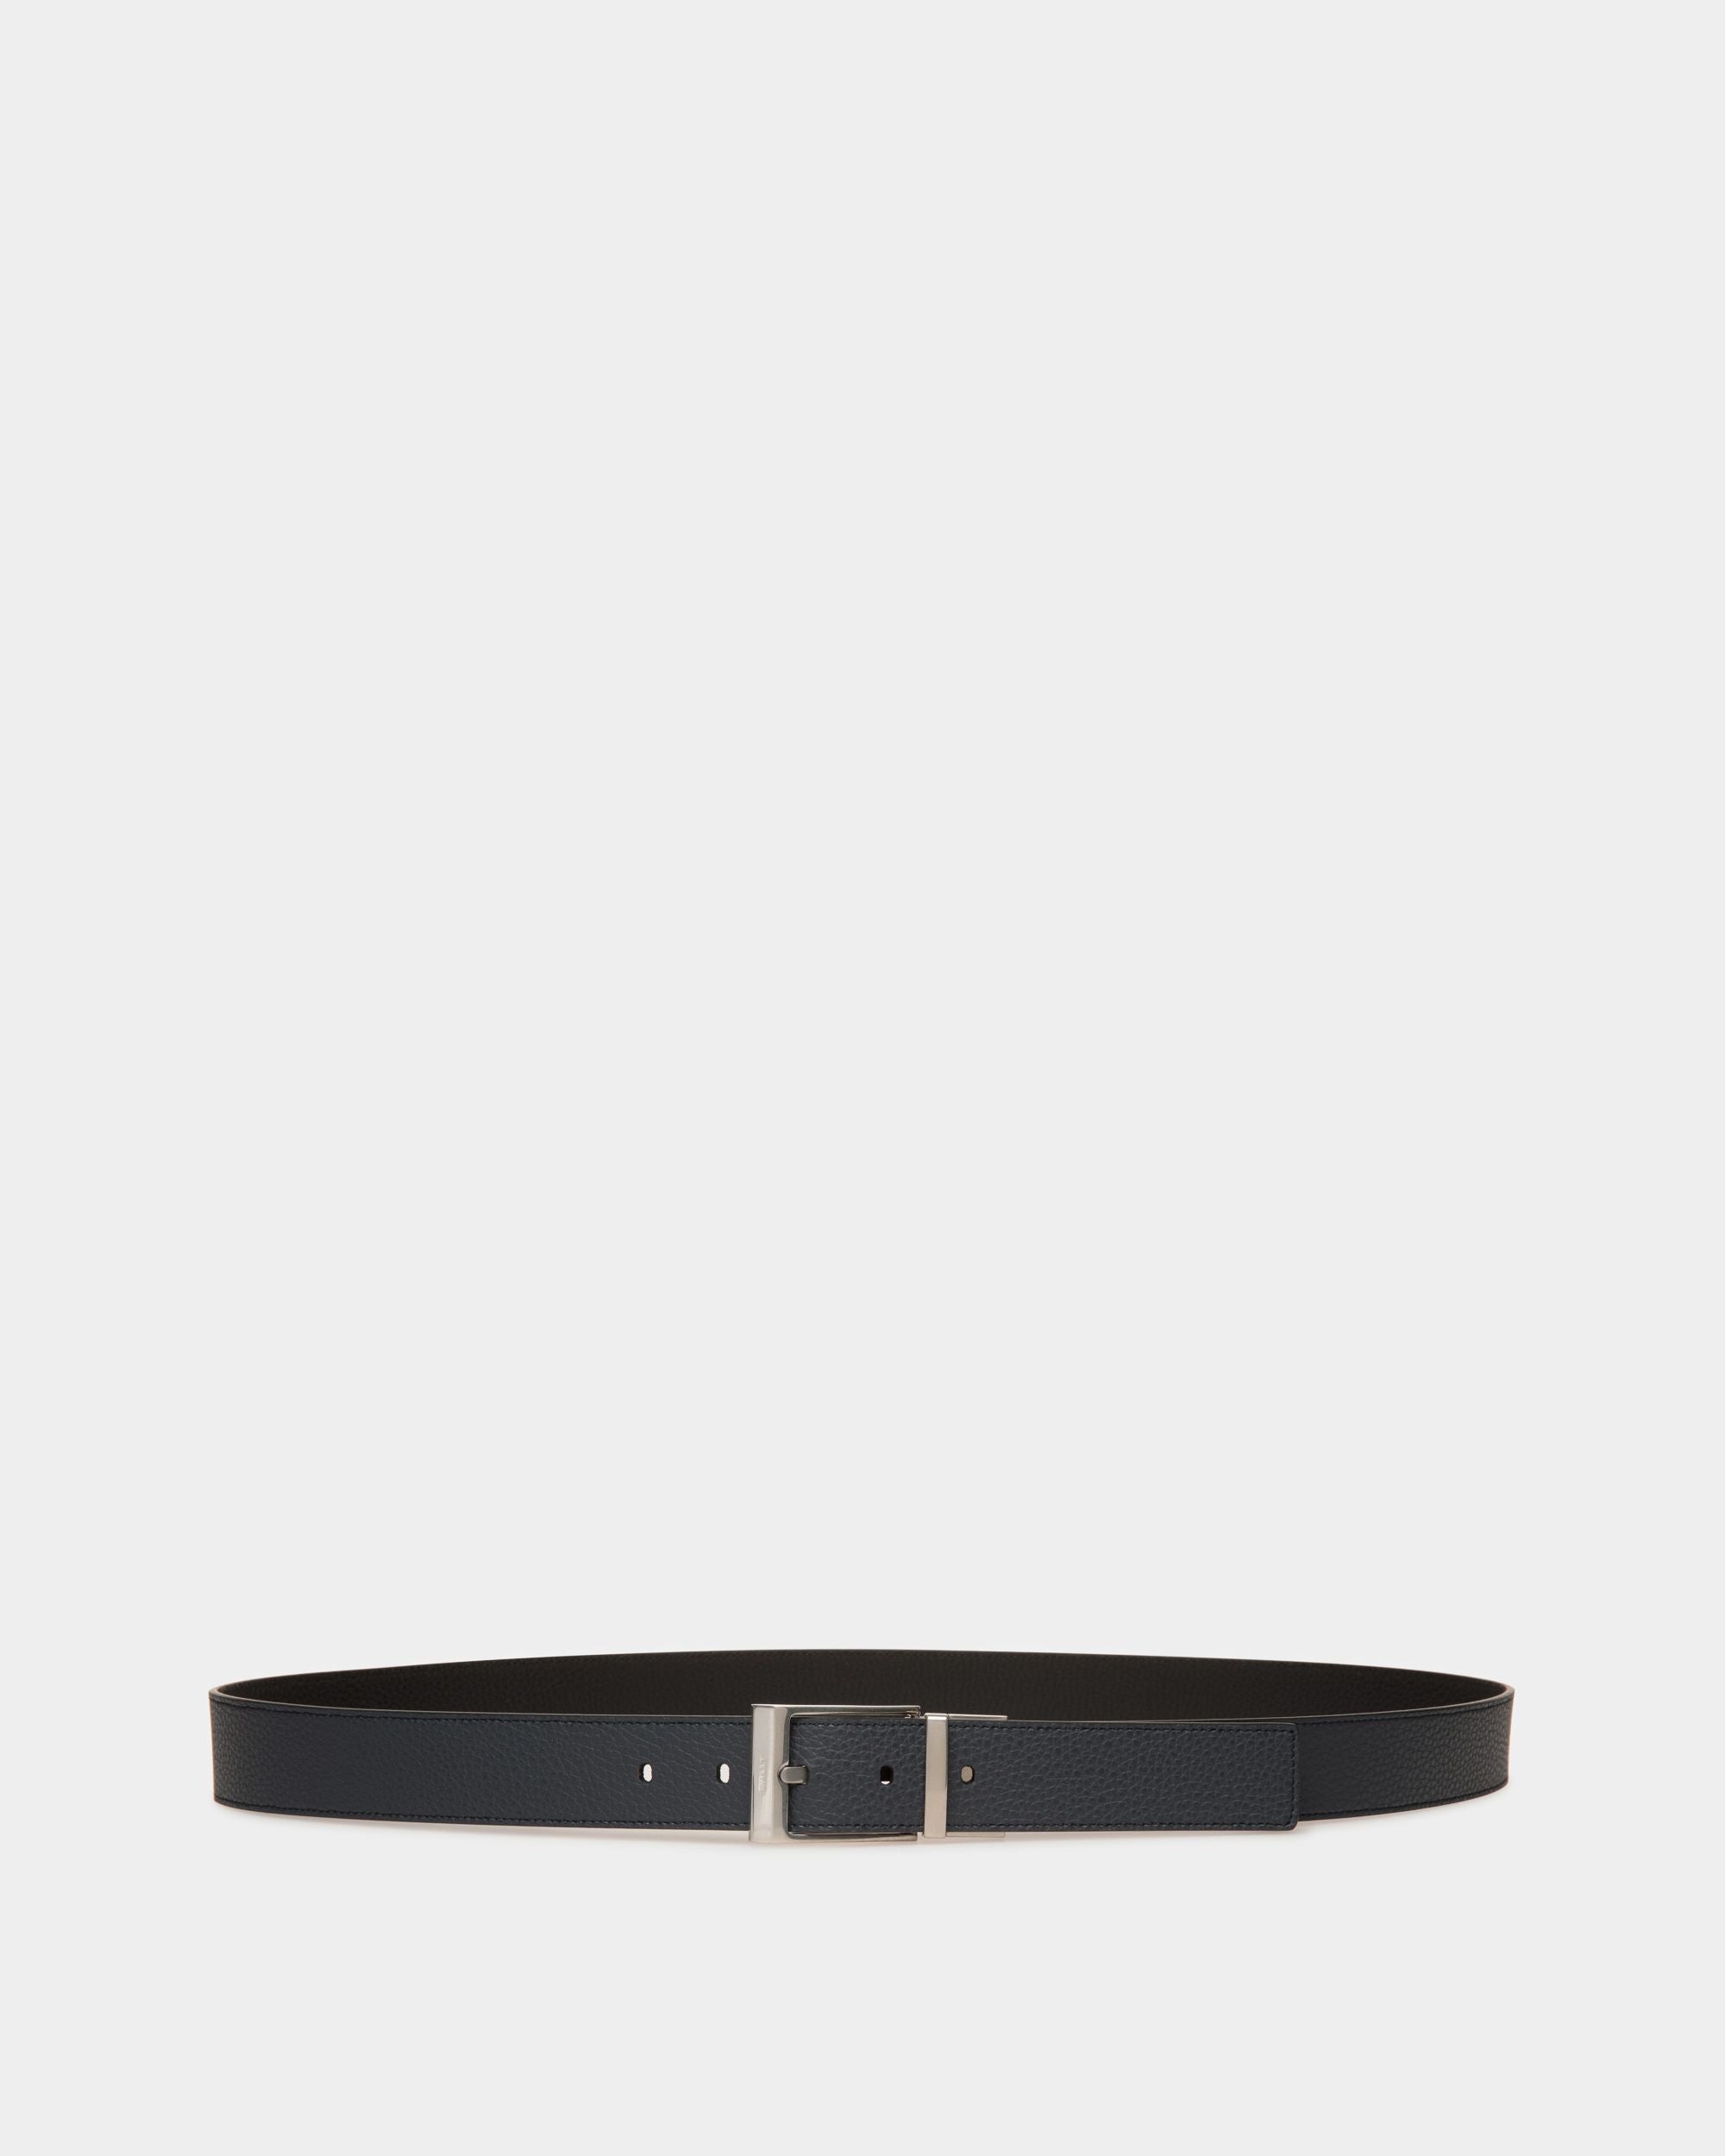 Shiffie 35 | Men's Adjustable And Reversible Belt | Midnight And Black Leather | Bally | Still Life Front